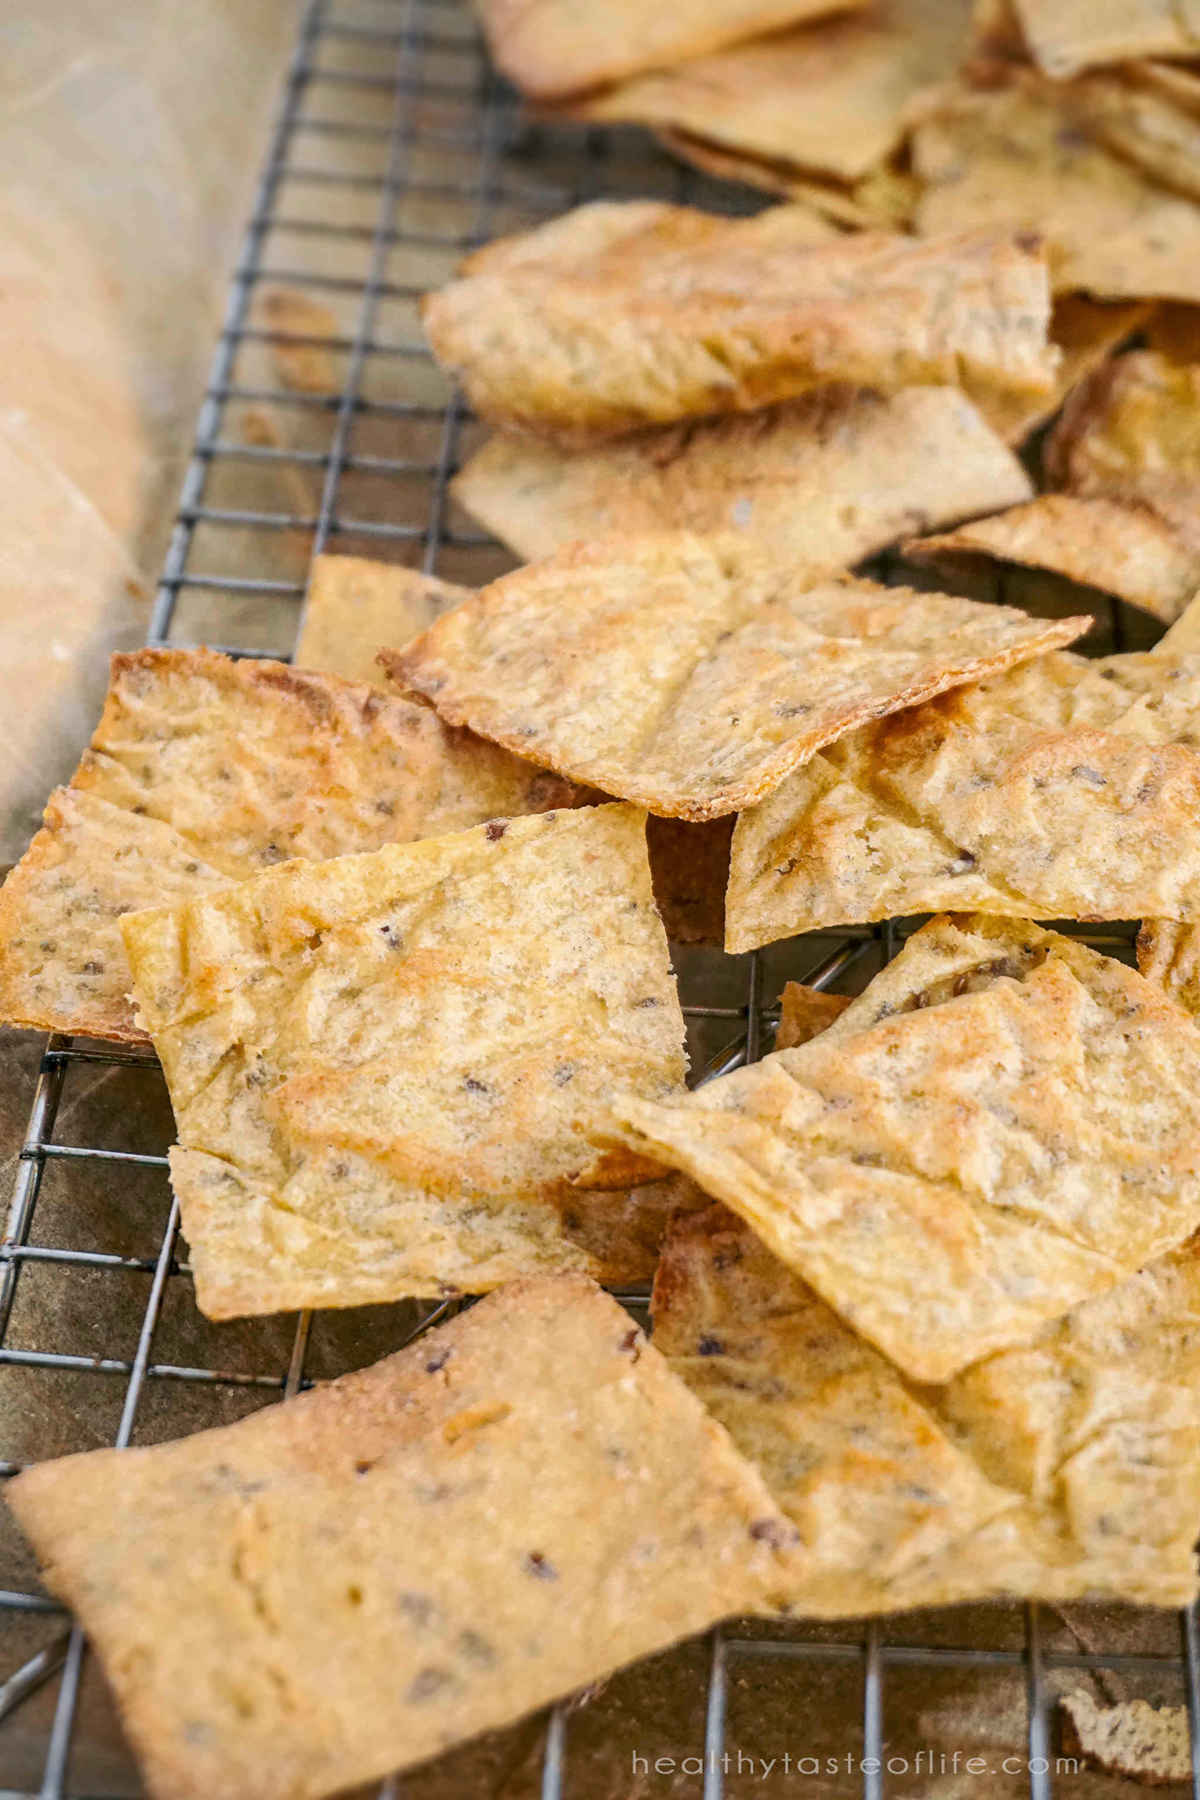 Vegan cauliflower crackers or chips baked in the oven - thin crisp and crunchy.
